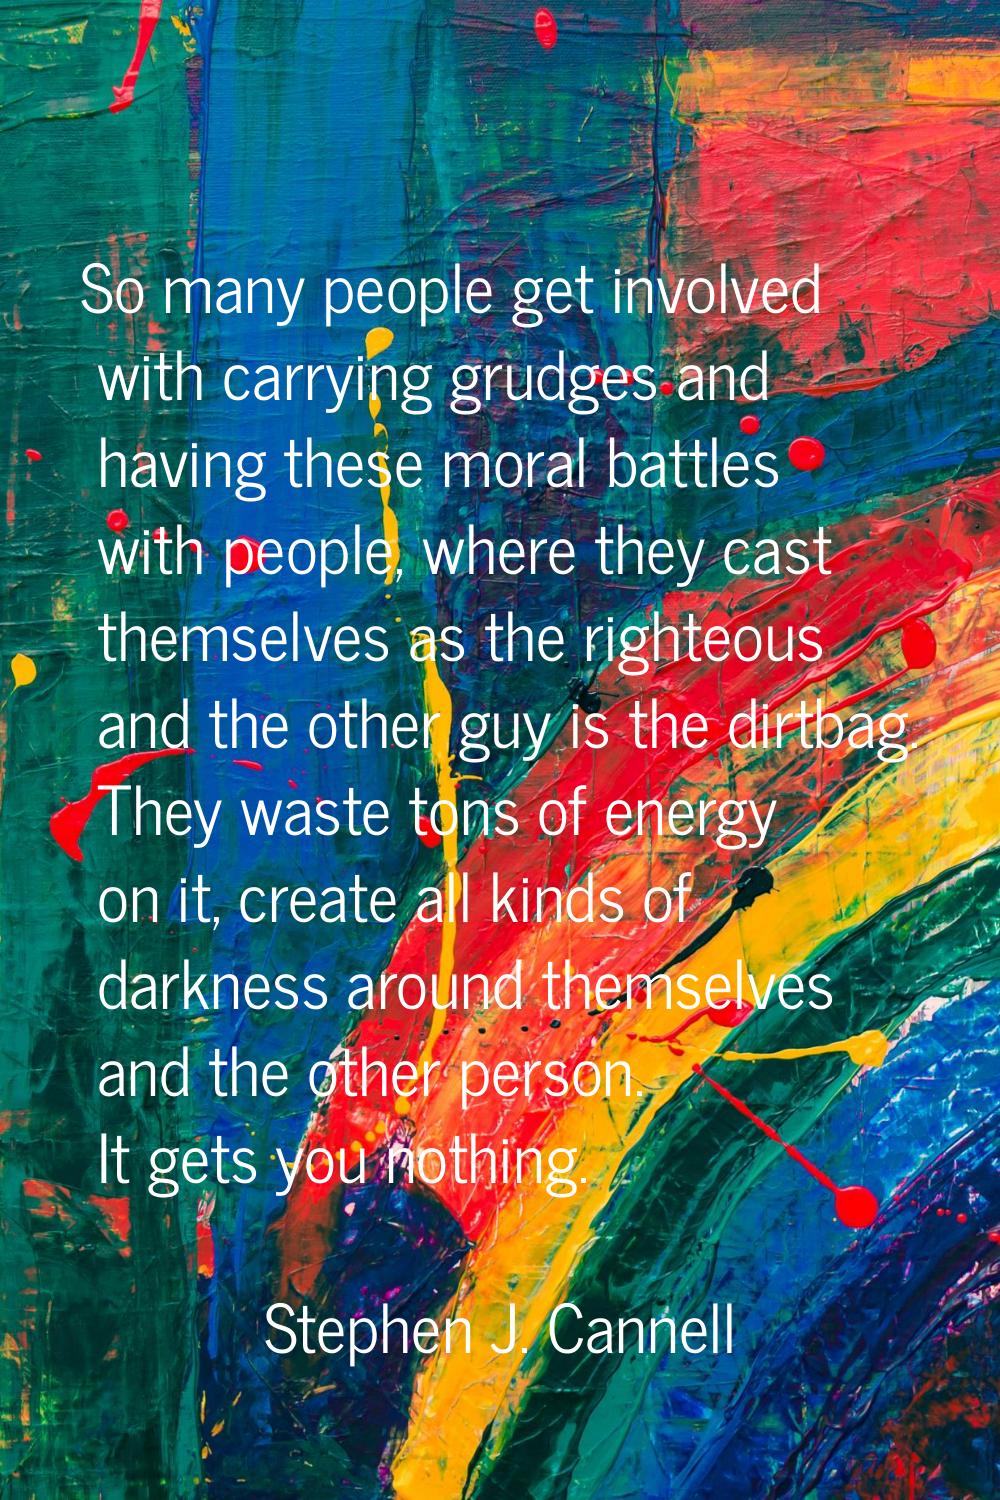 So many people get involved with carrying grudges and having these moral battles with people, where